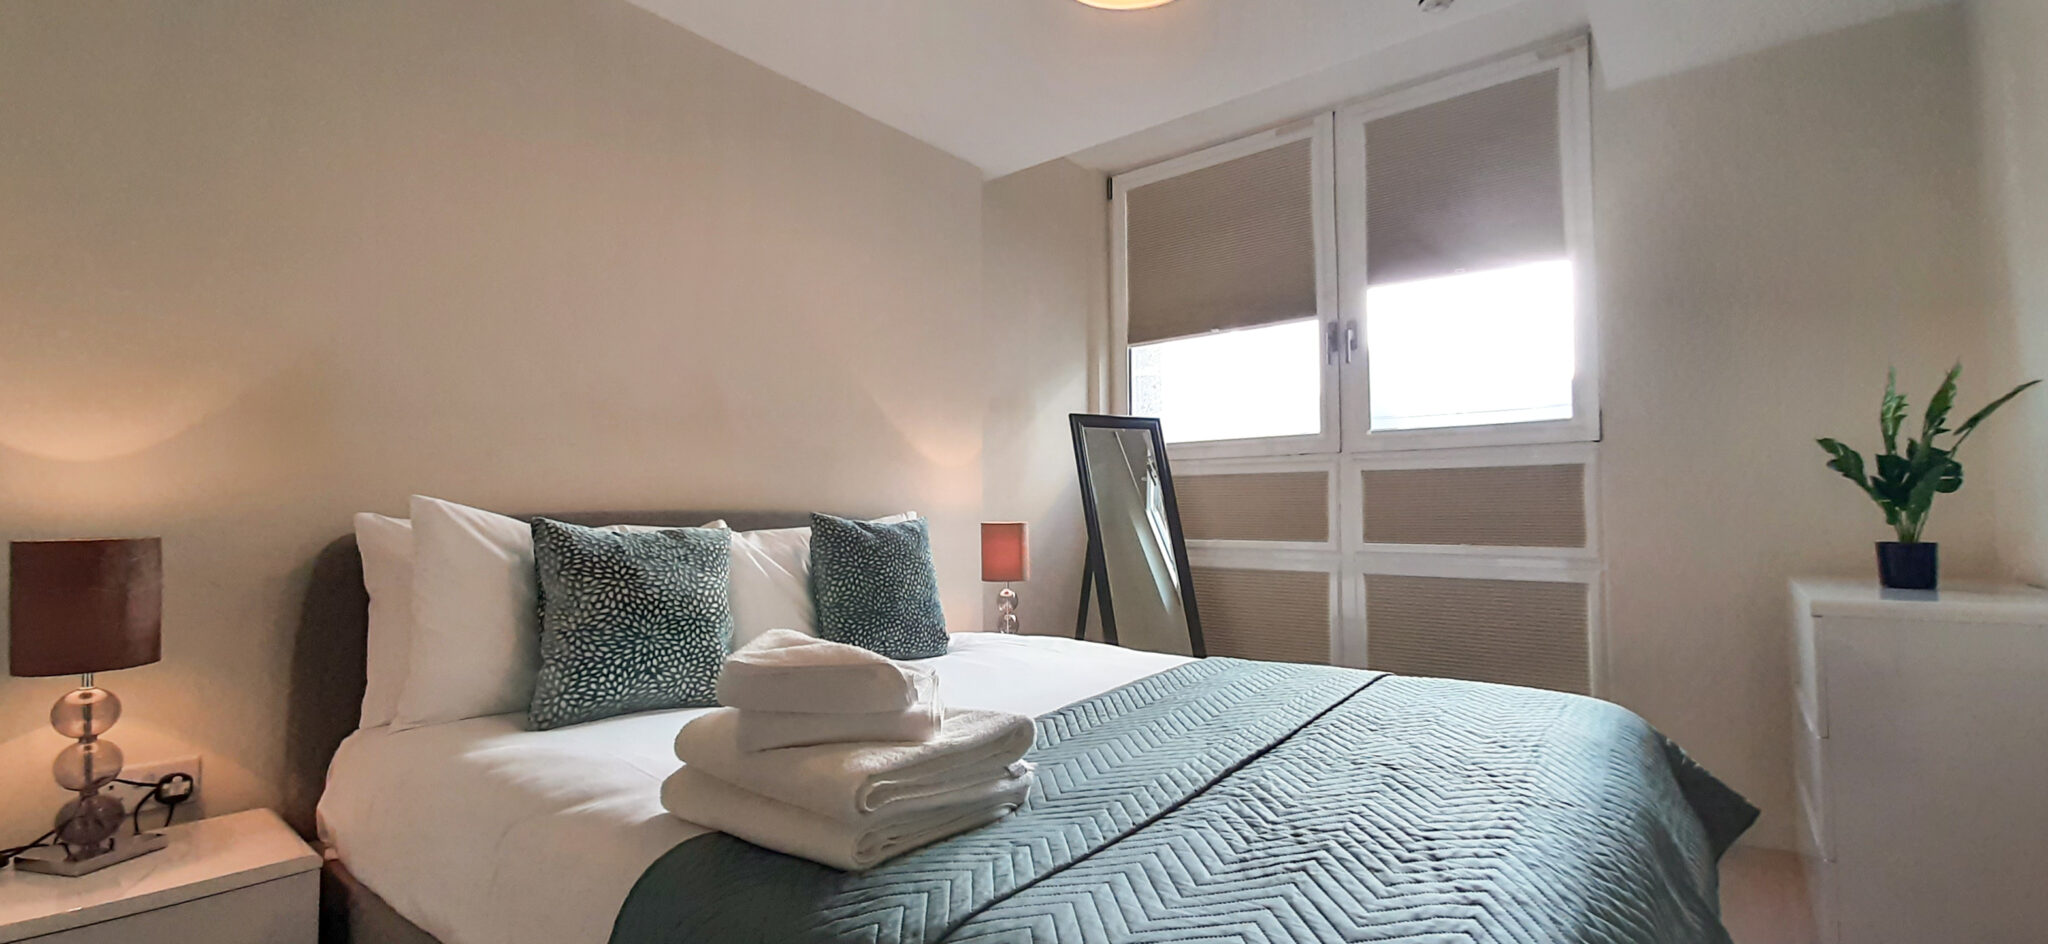 Serviced Apartments at Moorgate in The City of London